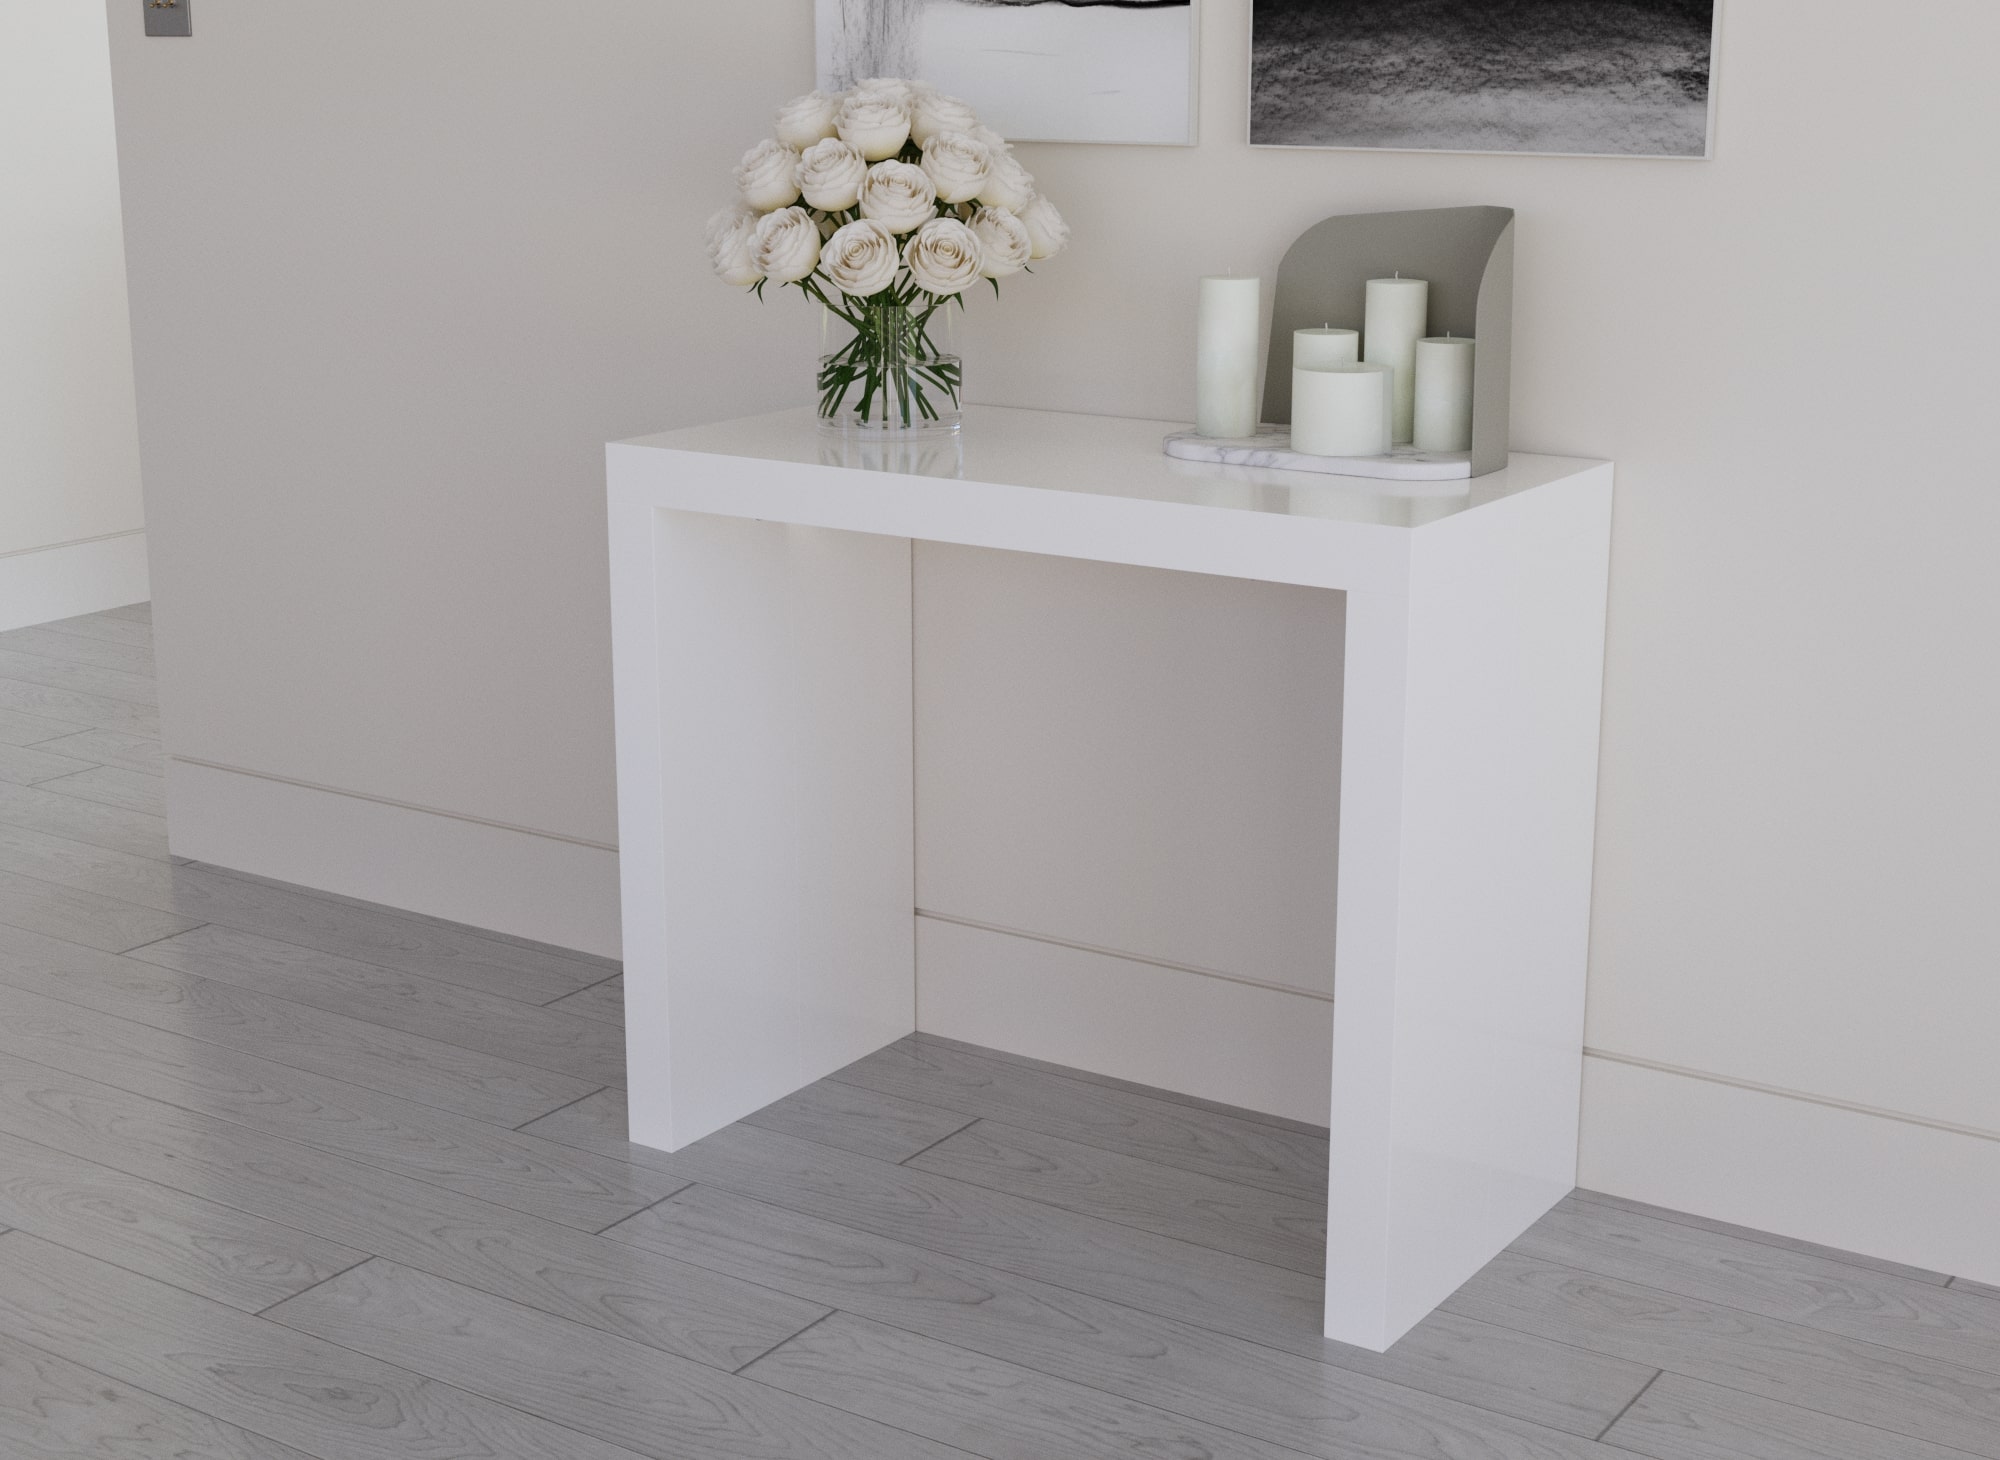 Table console extensible